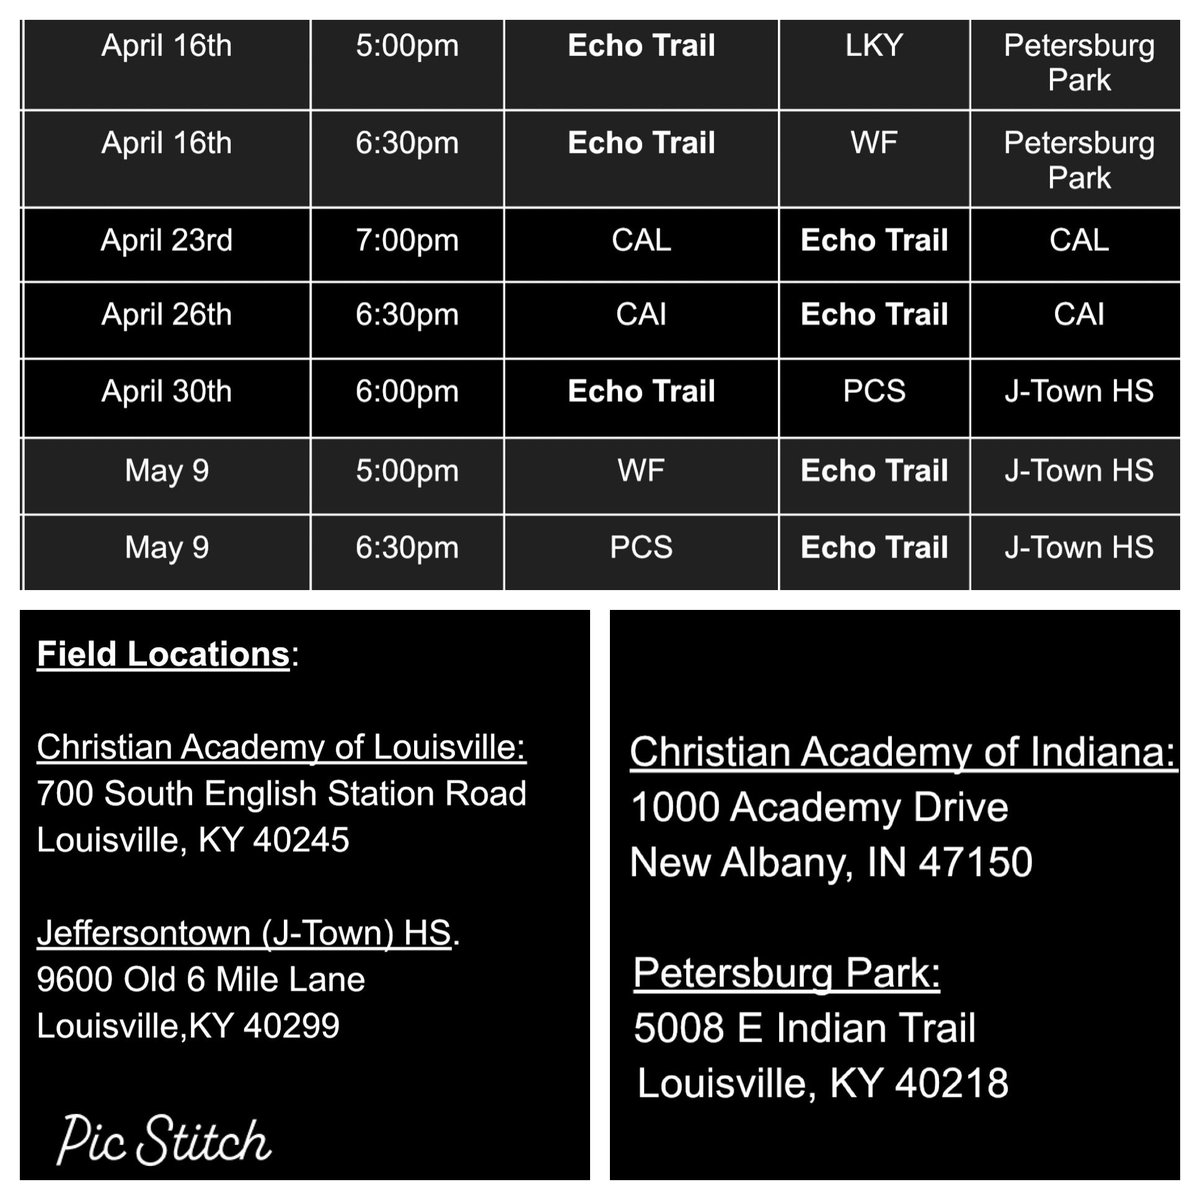 I wanted to share our schedule for this season! Not including is the tournament! But we will be back in action with a double header on Tuesday! Hopeful the rain holds off! #WolfPackSoftball #ETMS #ExpectgreaTness